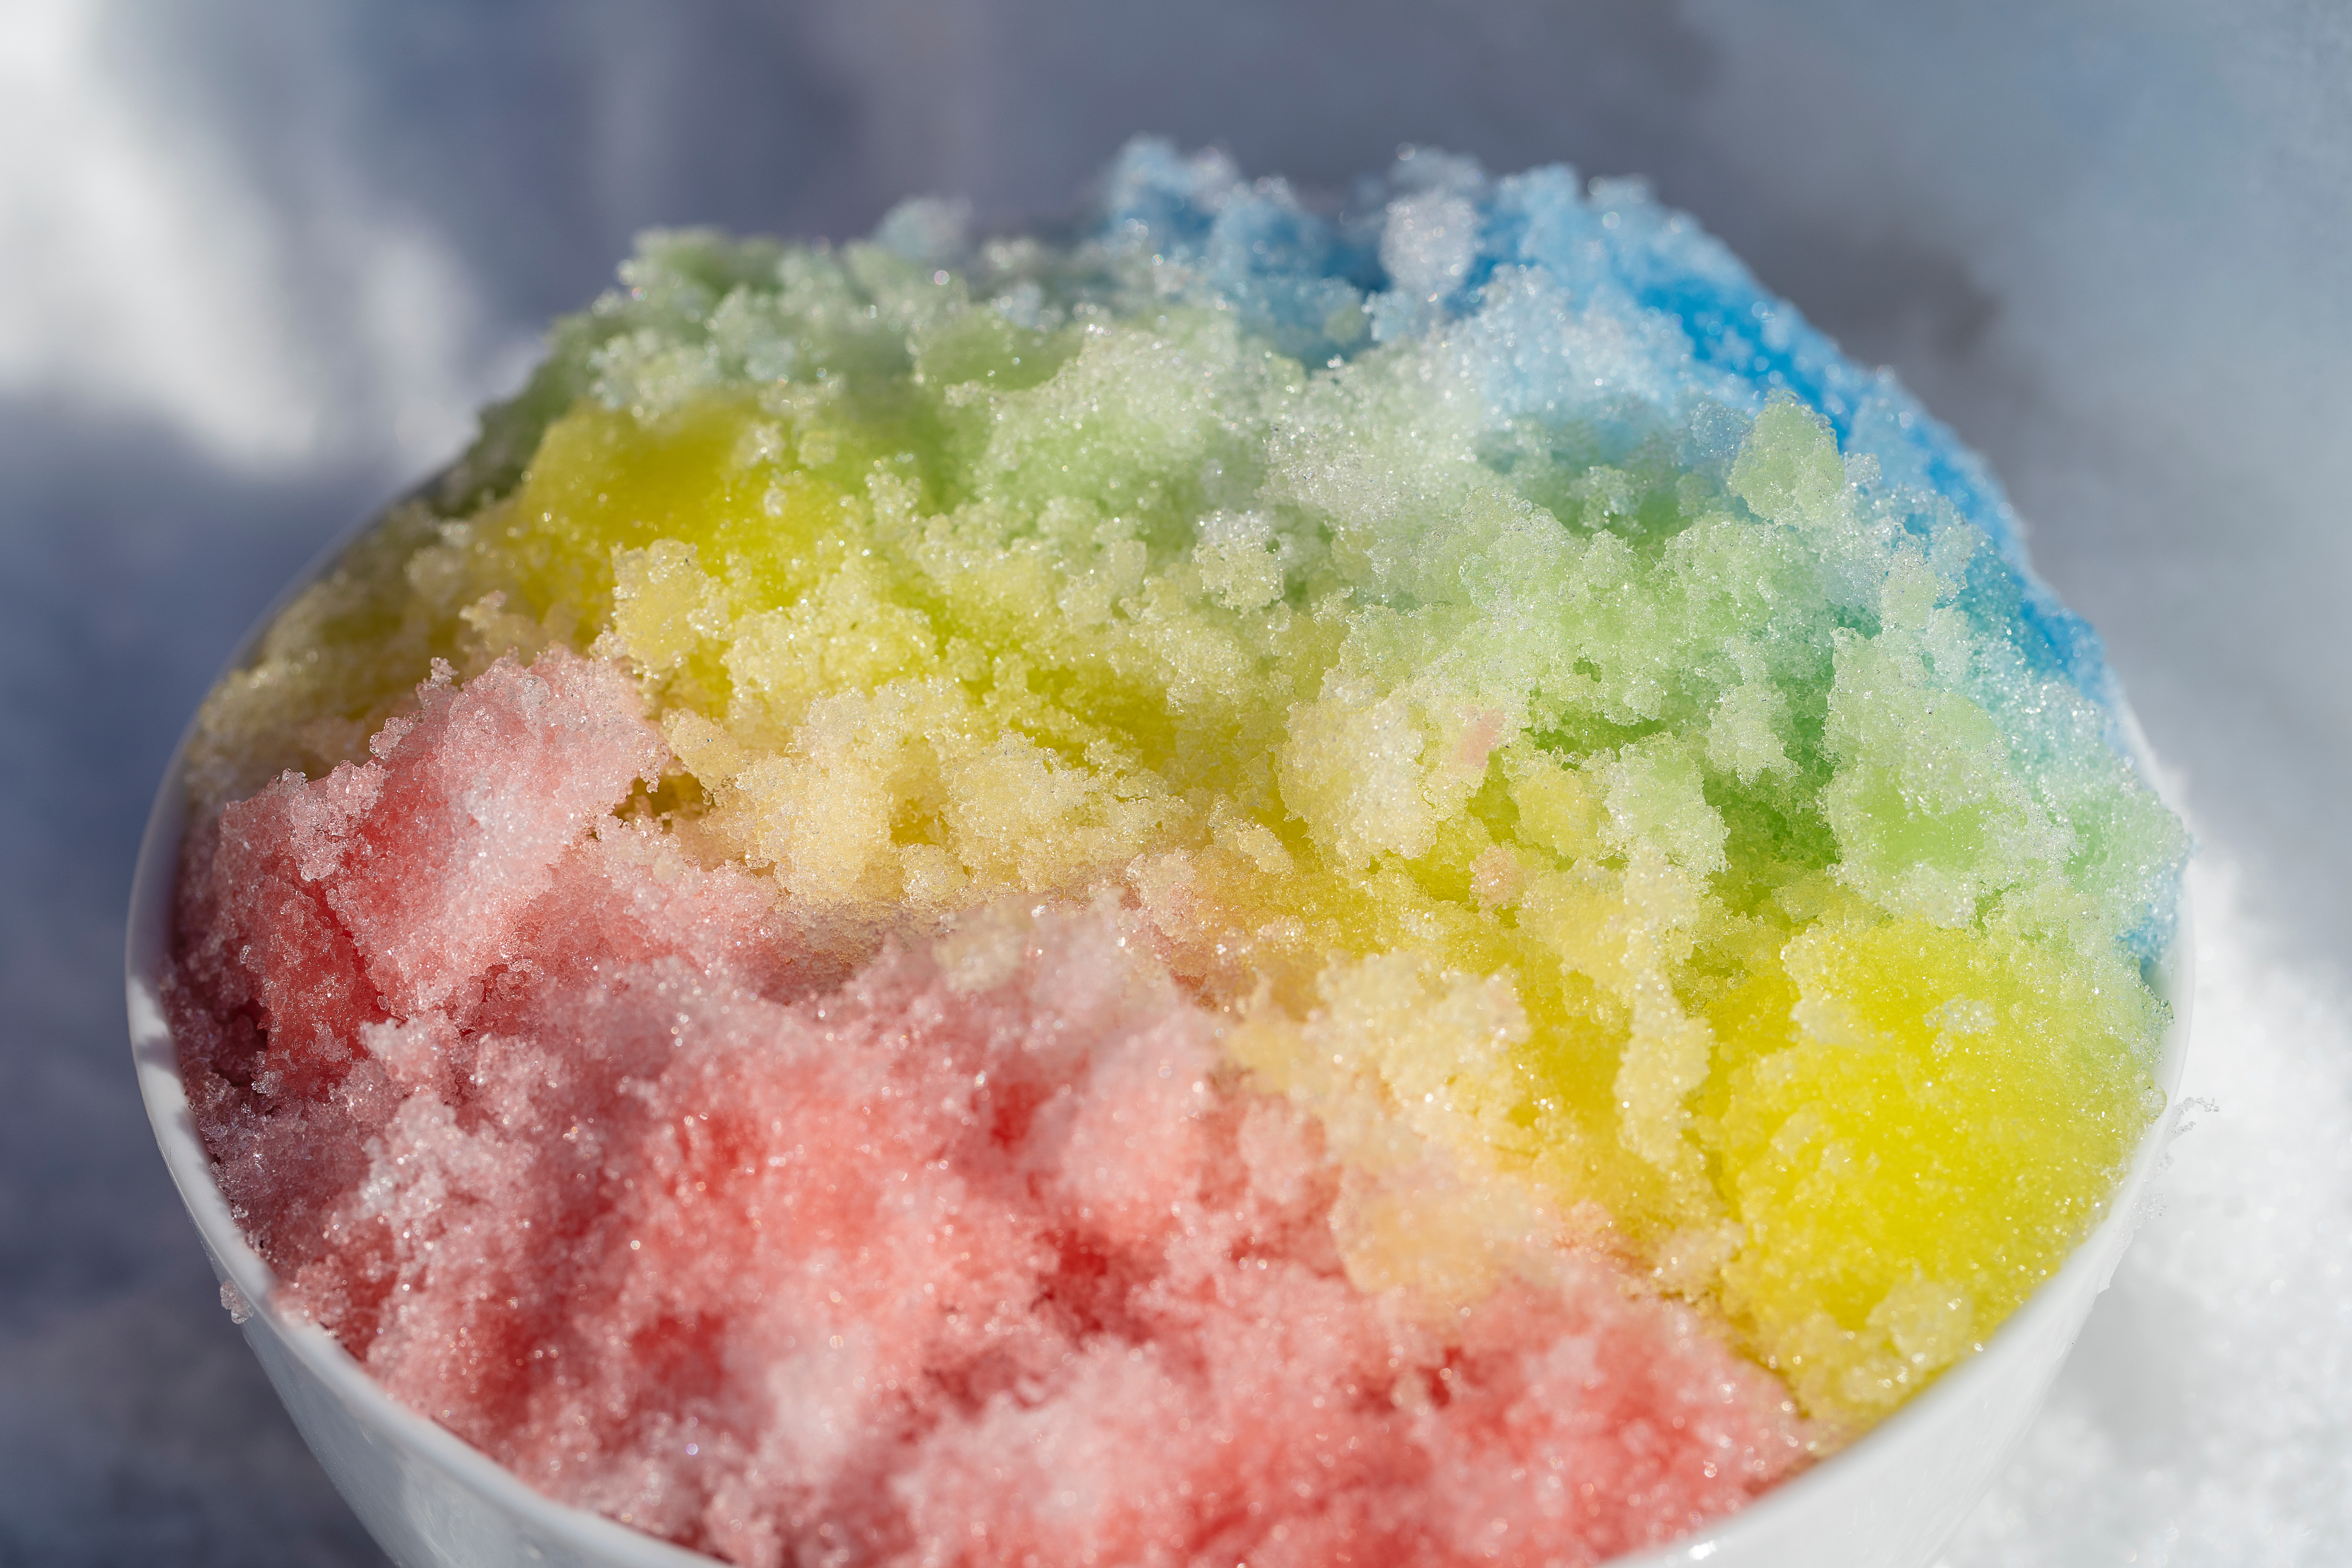 Rainbow shaved ice in dessert bowl on white snow background in winter, close up